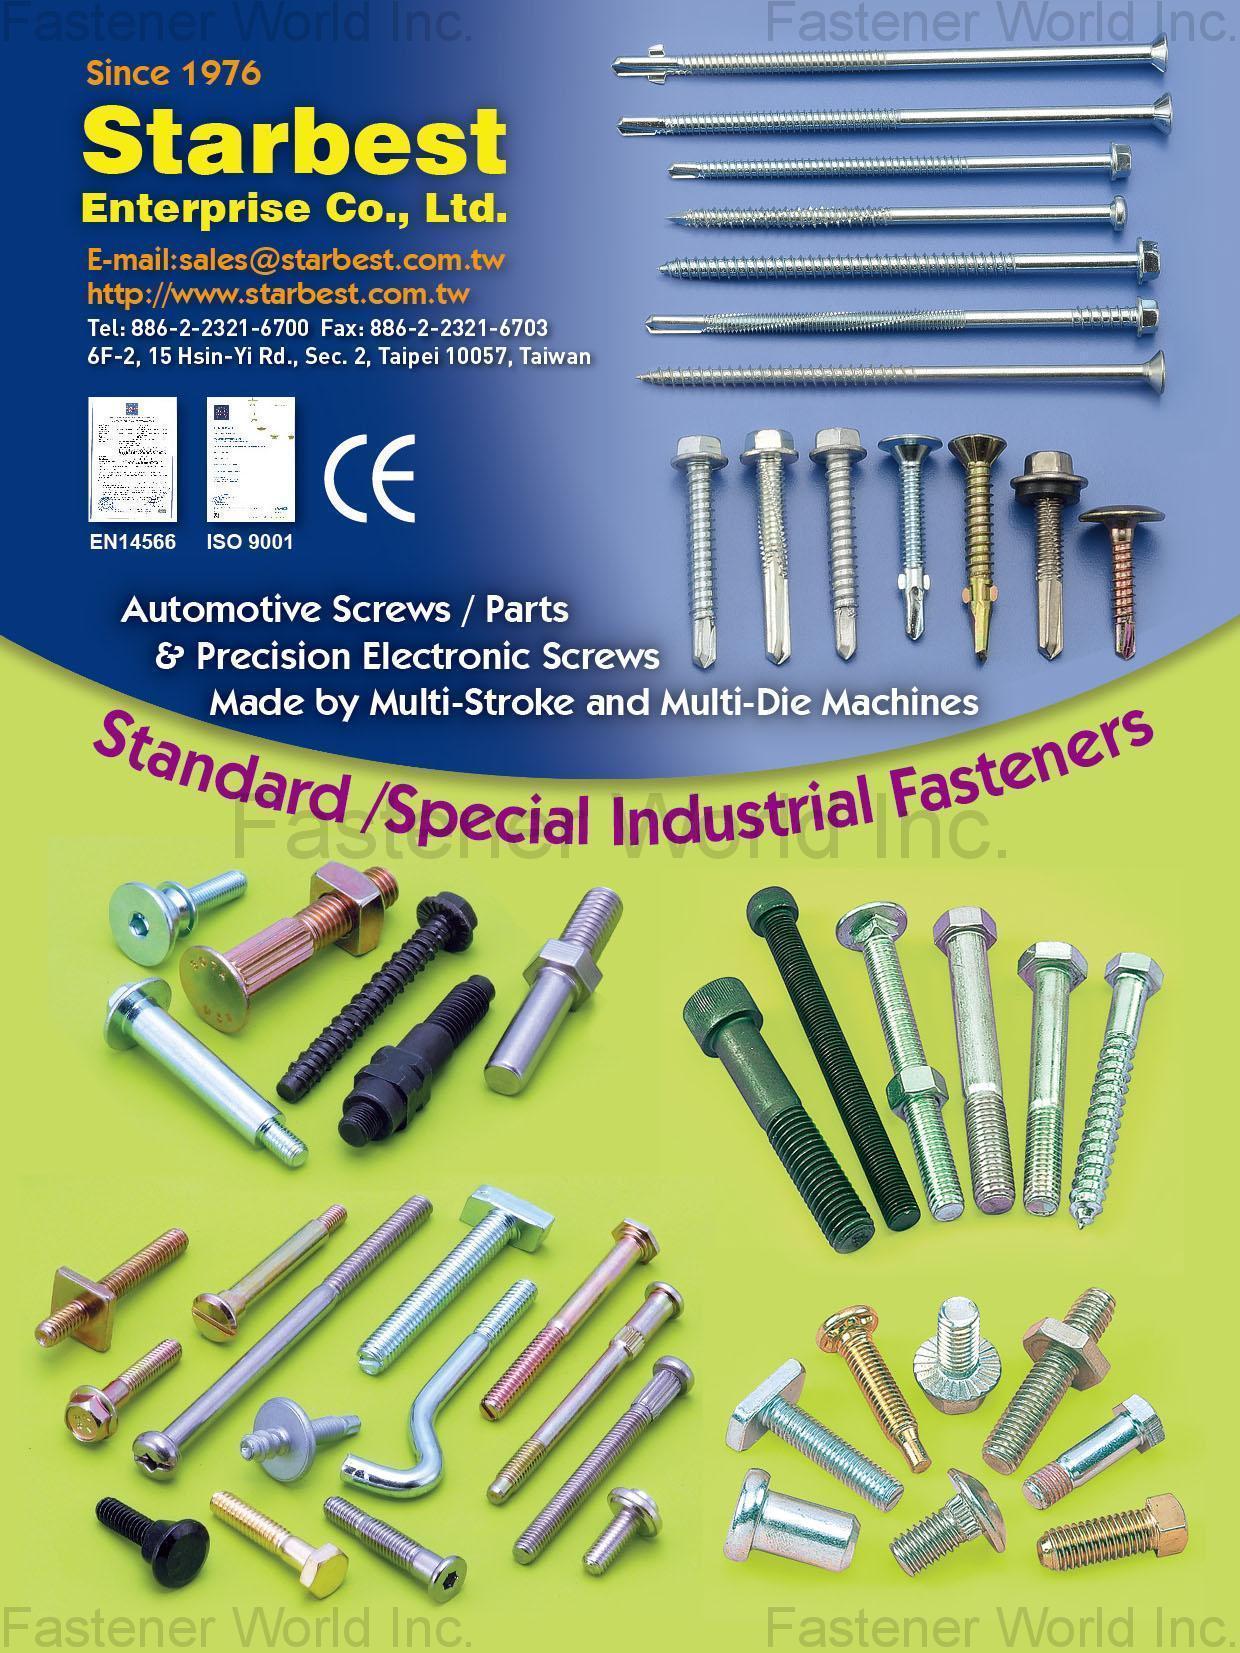 Customized Special Screws / Bolts Standard/Special Industrial Fasteners (Automotive Screws / Parts & Precision Electronic Screws, Made by Multi-Stroke and Multi-Die Machines)